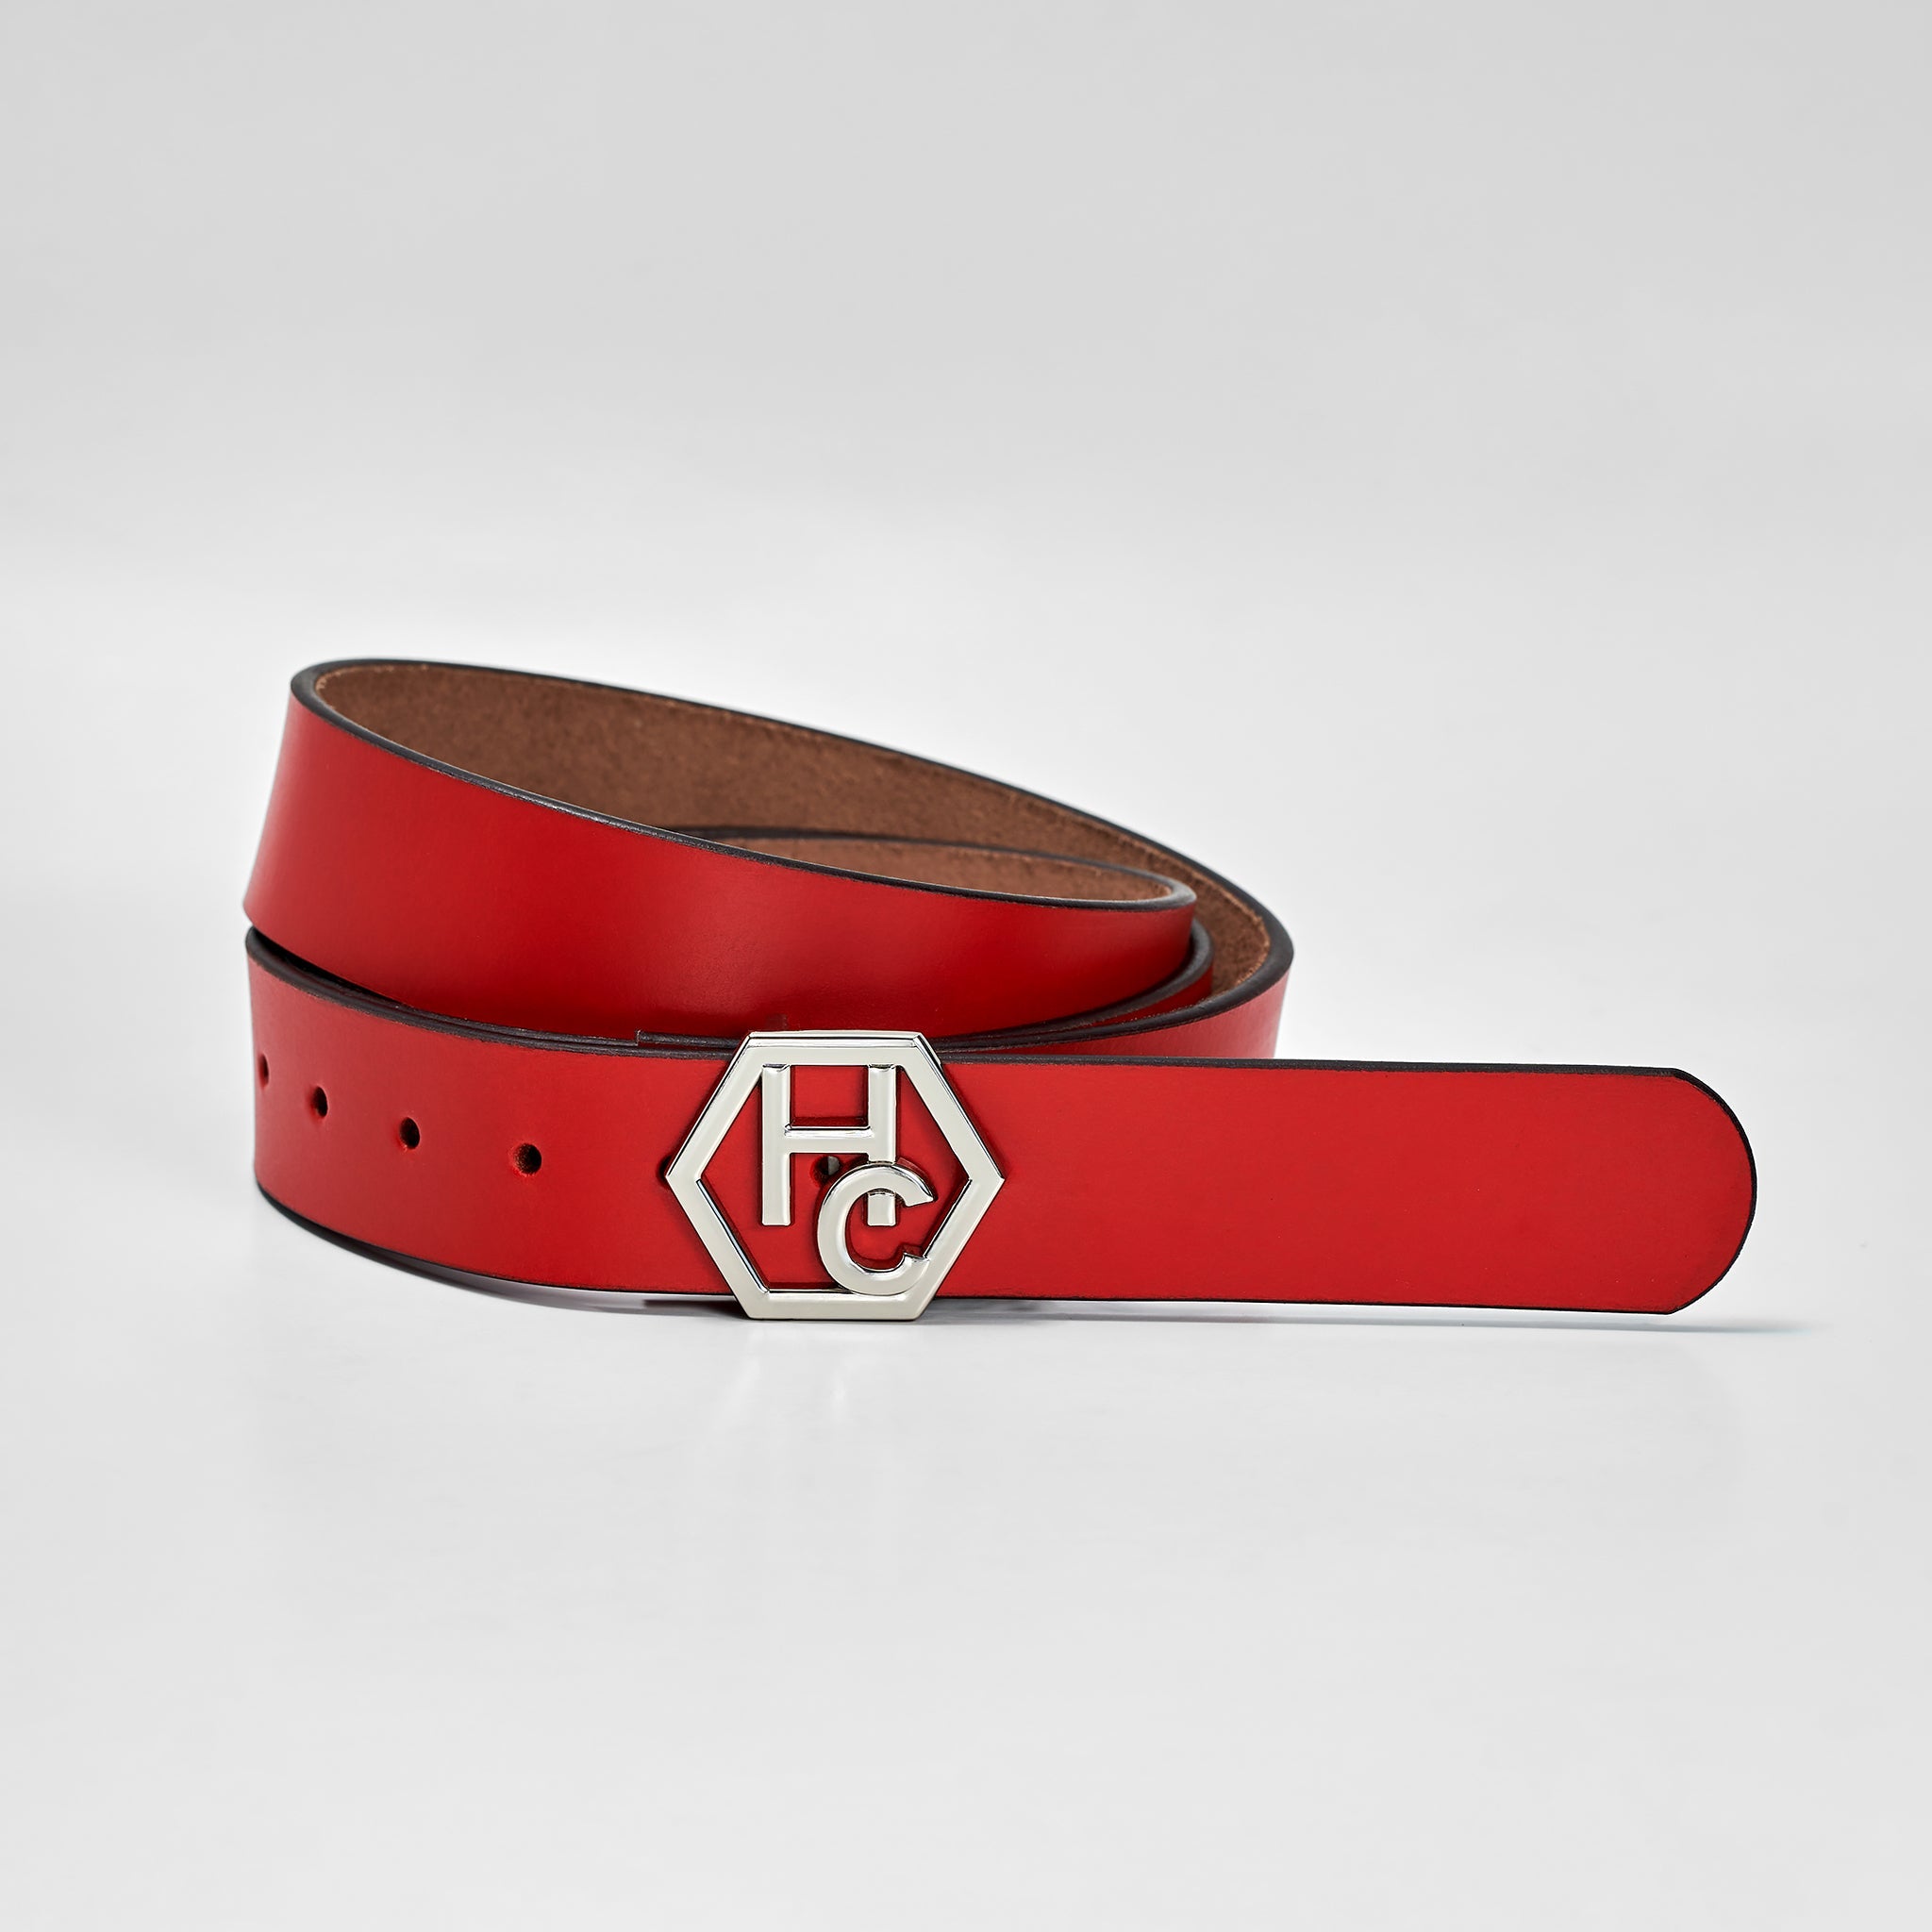 Hedonist Chicago Seamless Red Leather Belt 1" 32381330686103